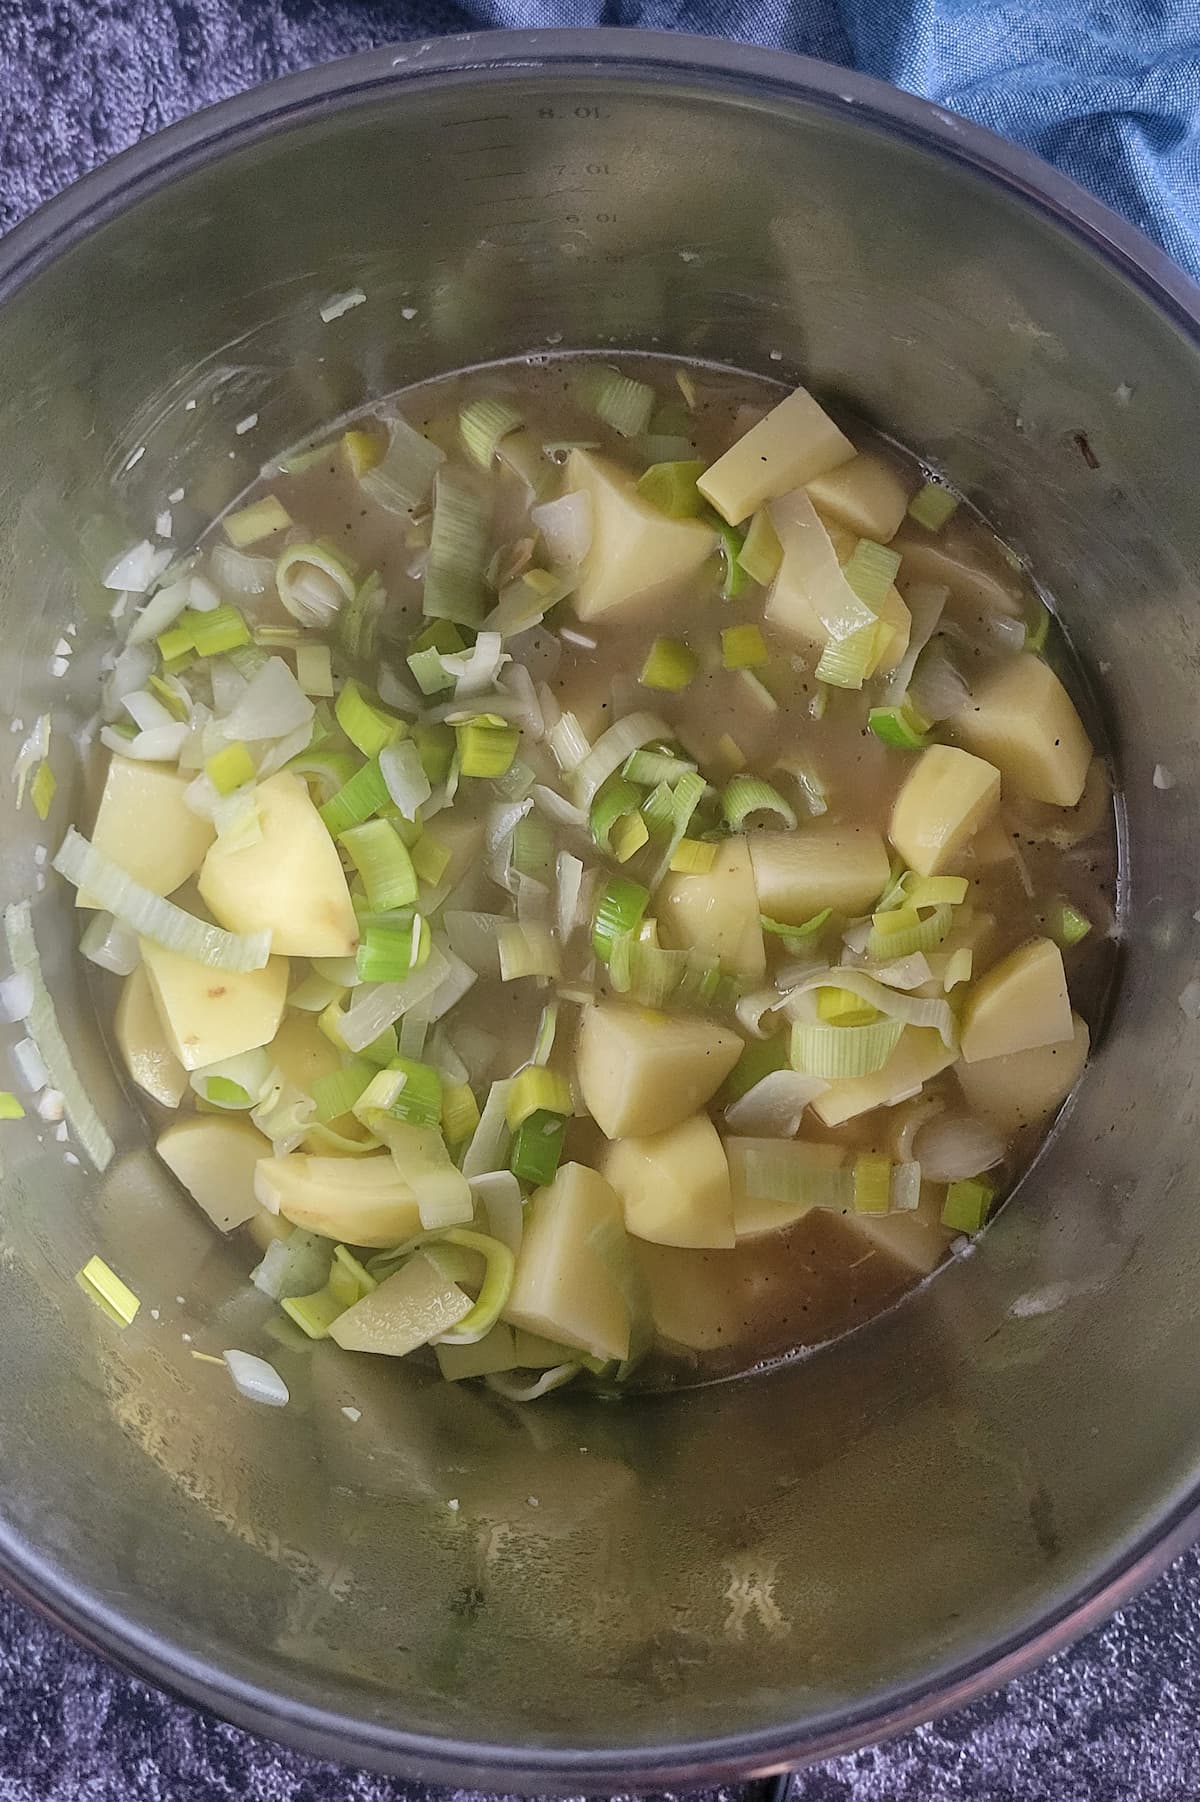 diced potatoes and leeks in broth in a pot